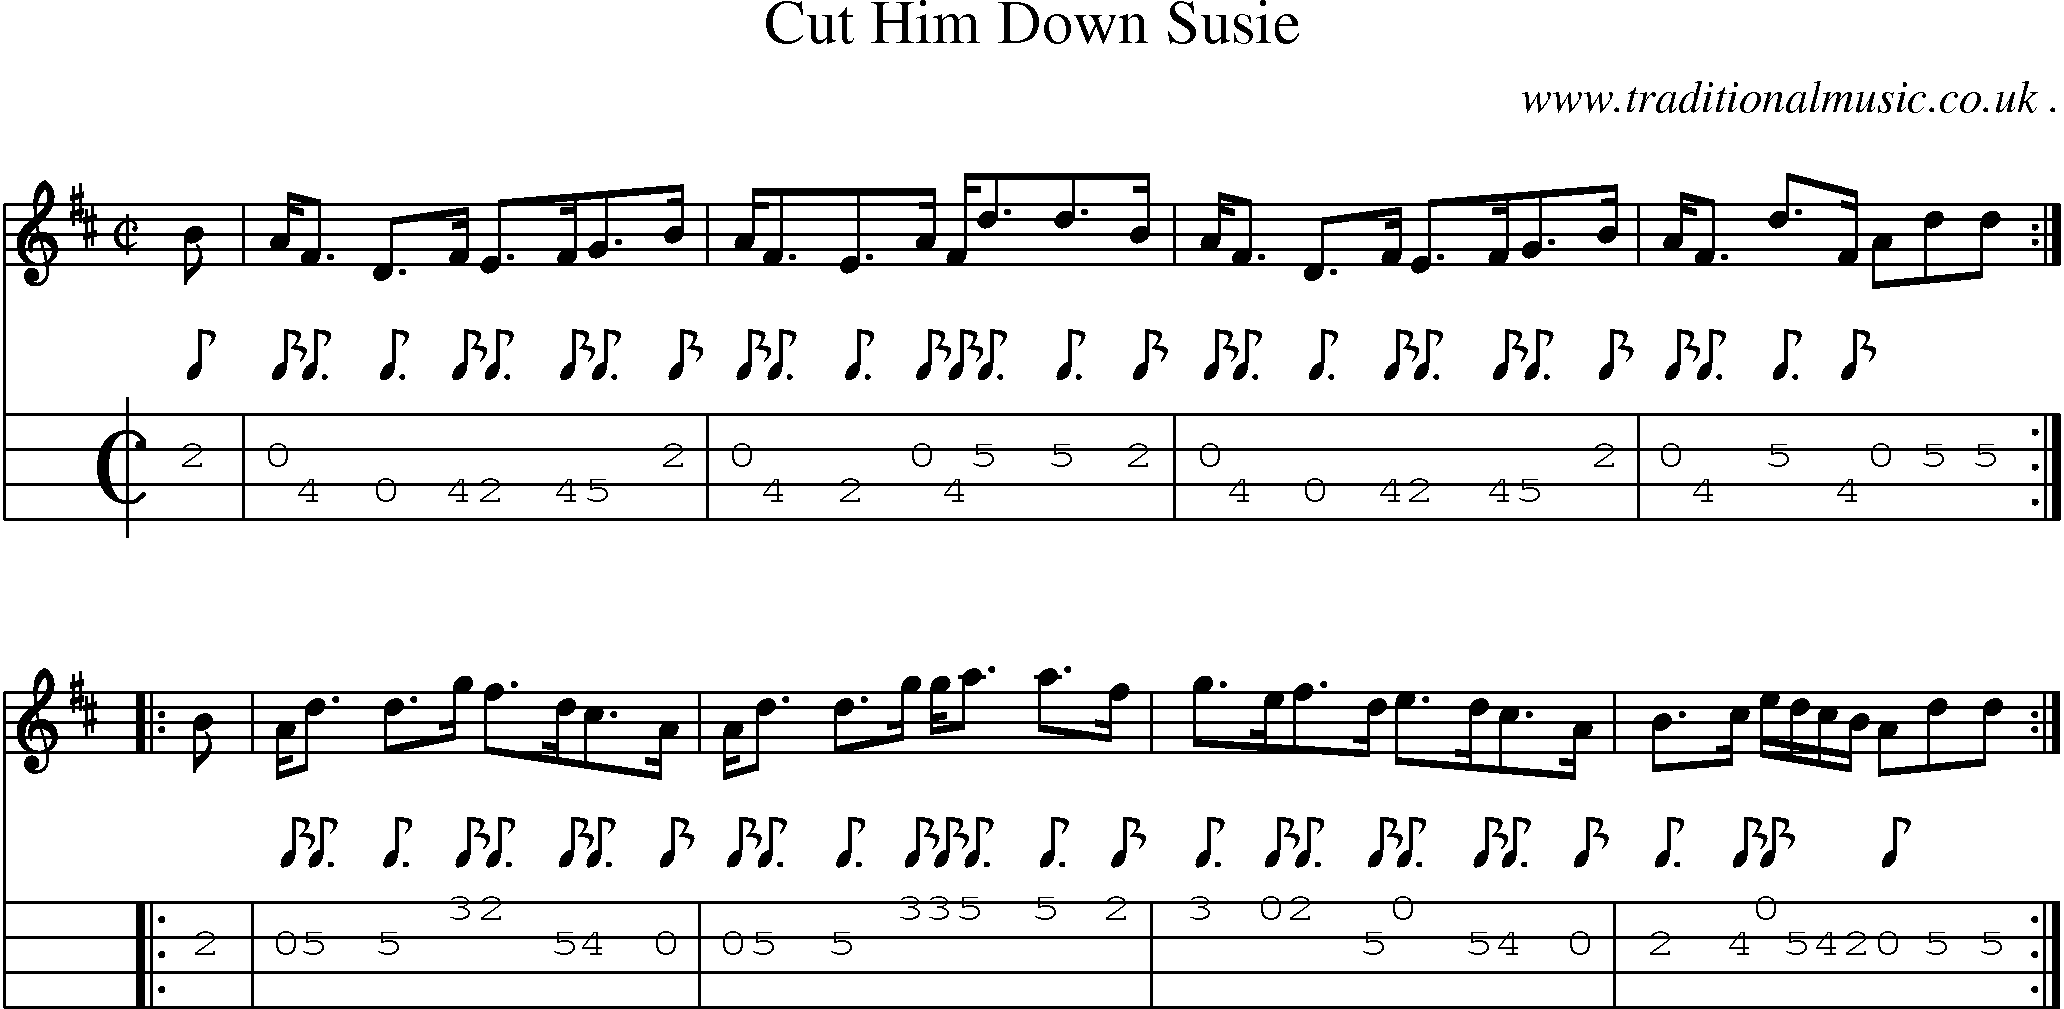 Sheet-music  score, Chords and Mandolin Tabs for Cut Him Down Susie